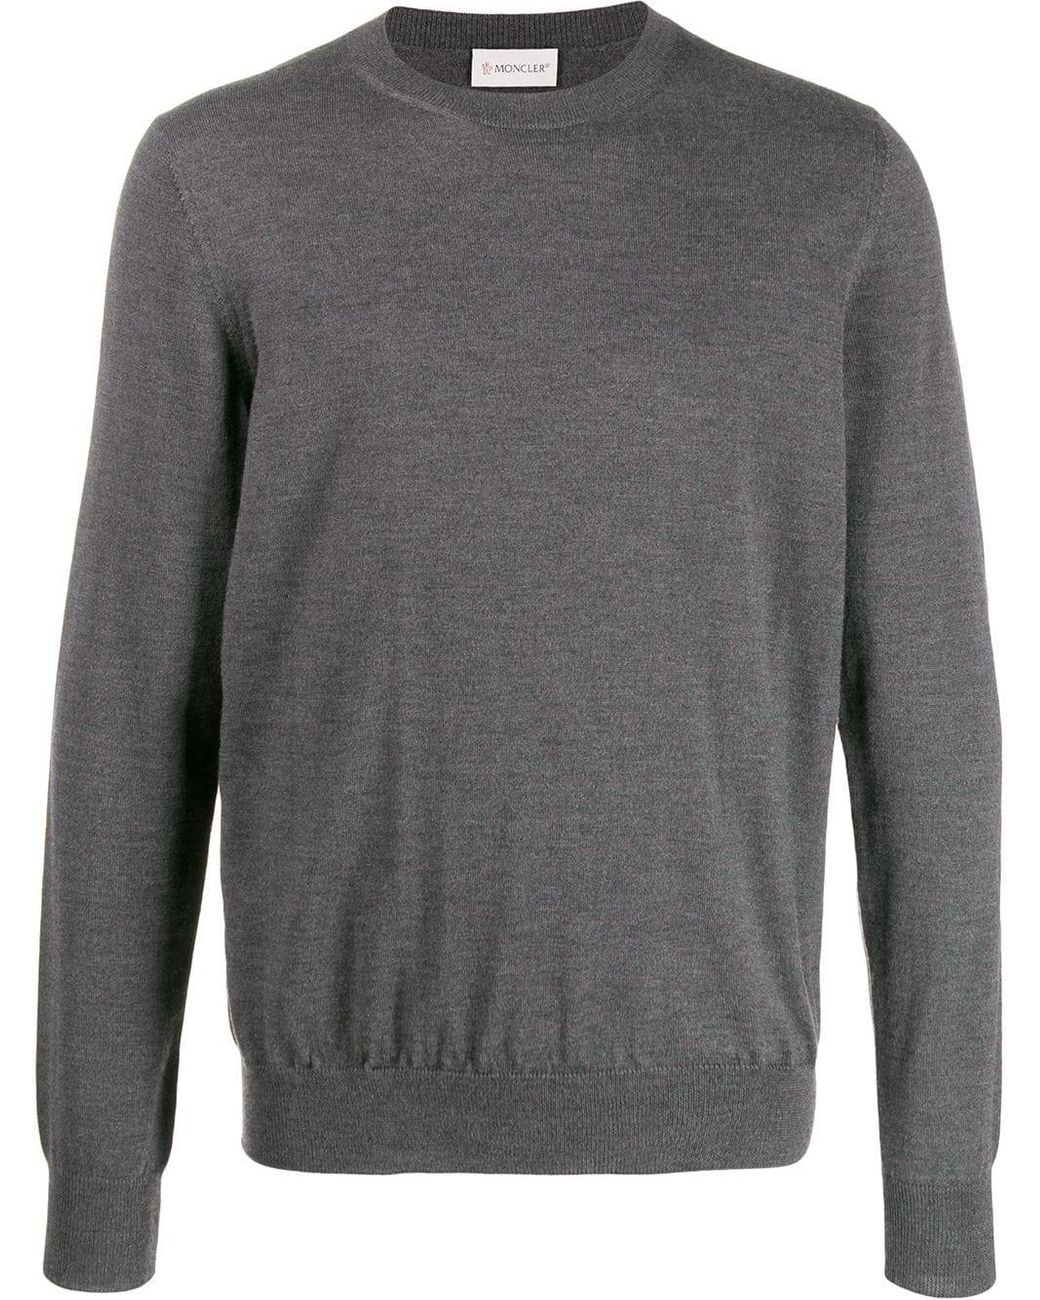 Moncler Wool Crewneck Knitted Jumper in Grey (Gray) for Men - Lyst